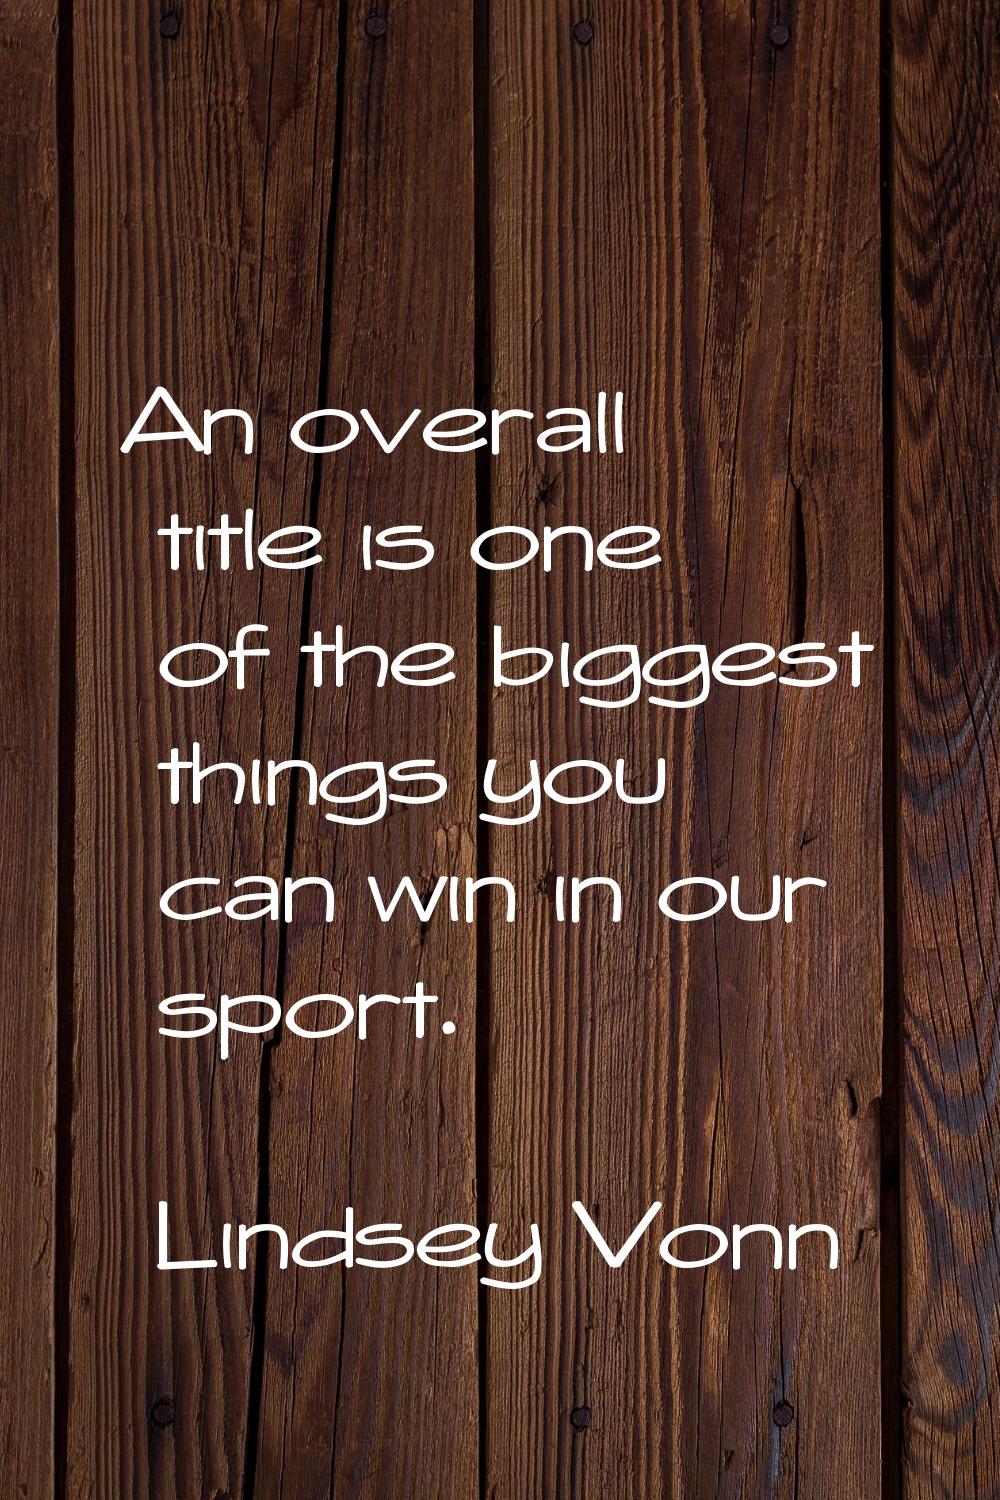 An overall title is one of the biggest things you can win in our sport.